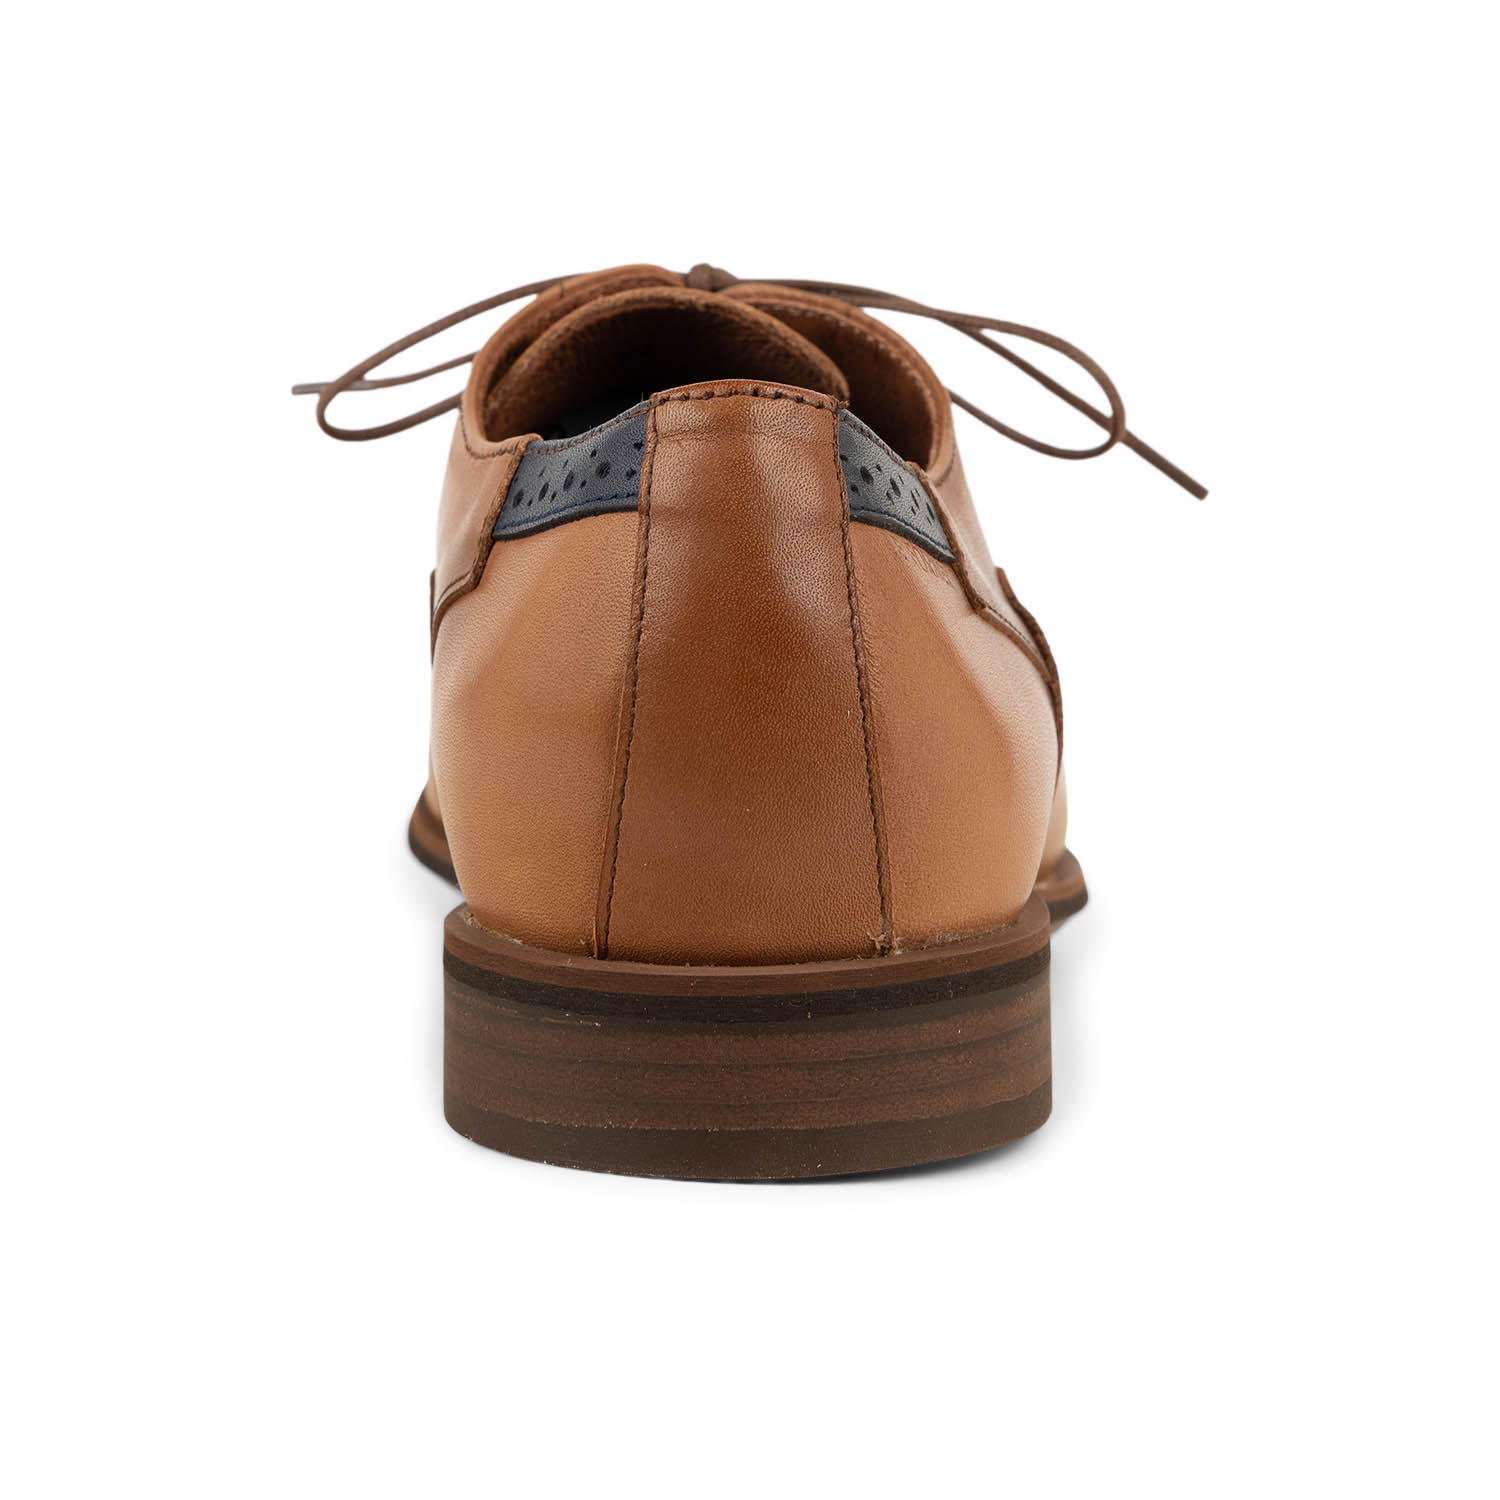 03 - FREDDY -  - Chaussures à lacets - Cuir